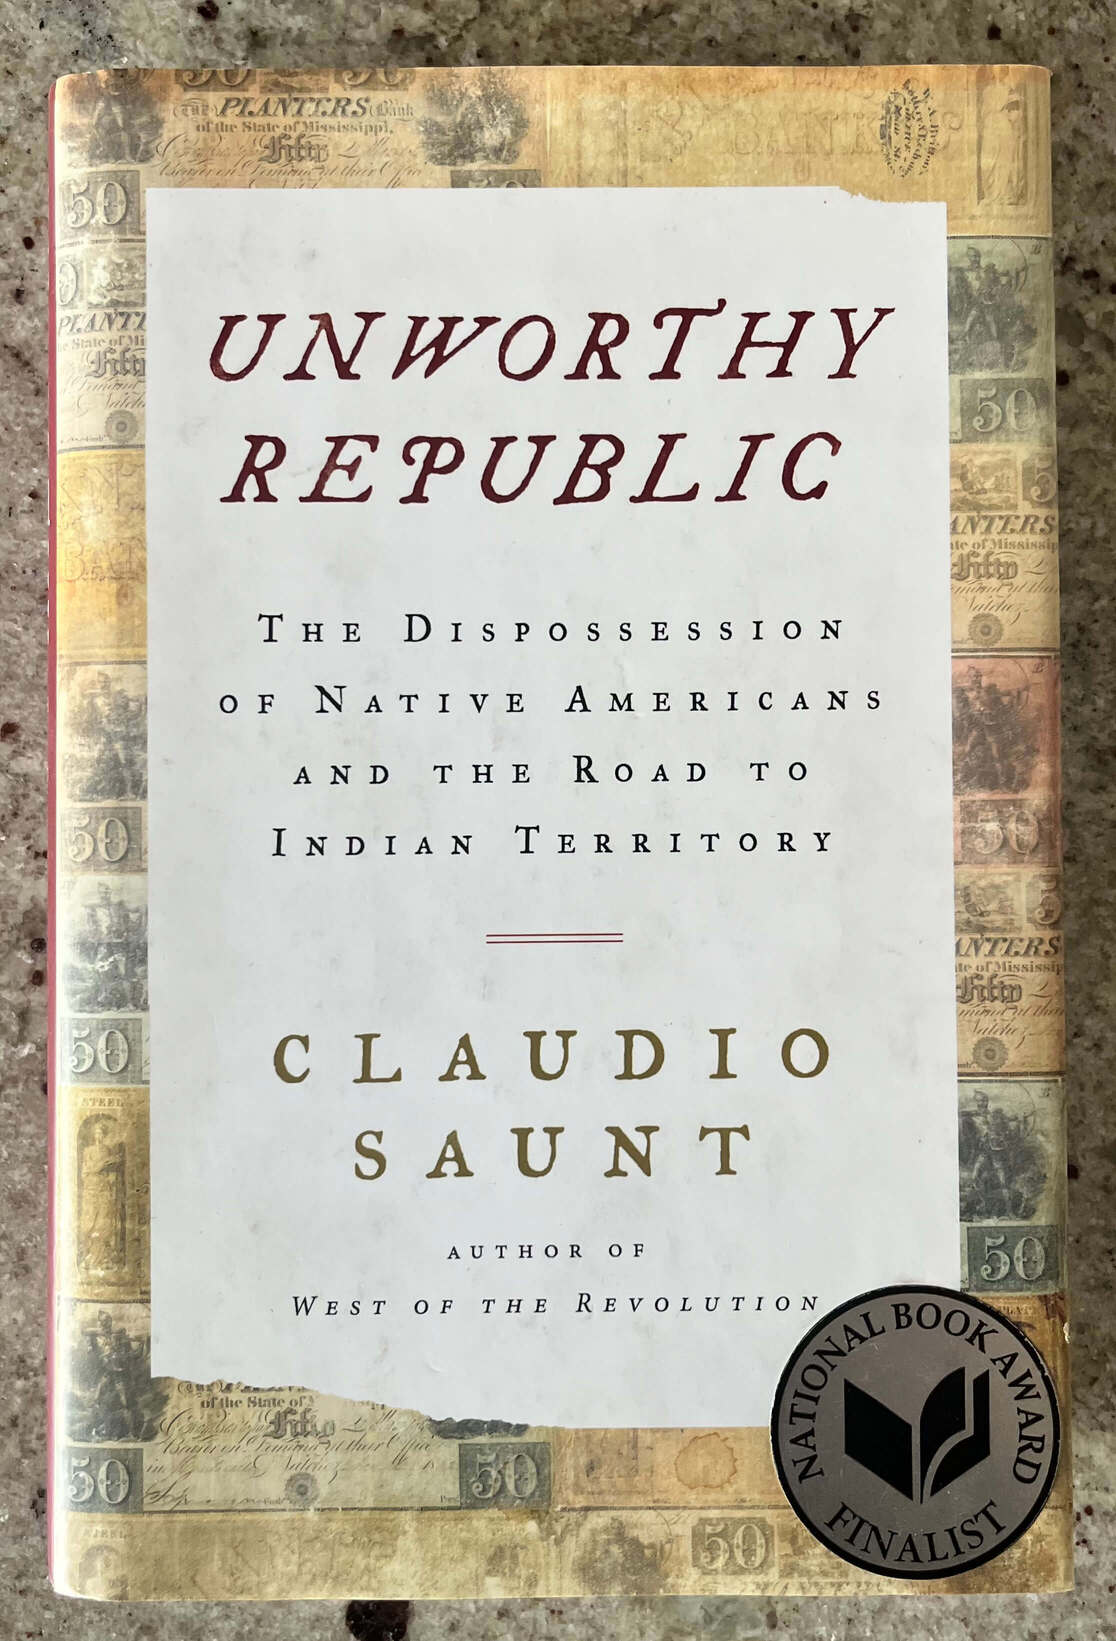 “Unworthy Republic: The Dispossession of Native Americans and the Road to Indian Territory” by Claudio Saunt.